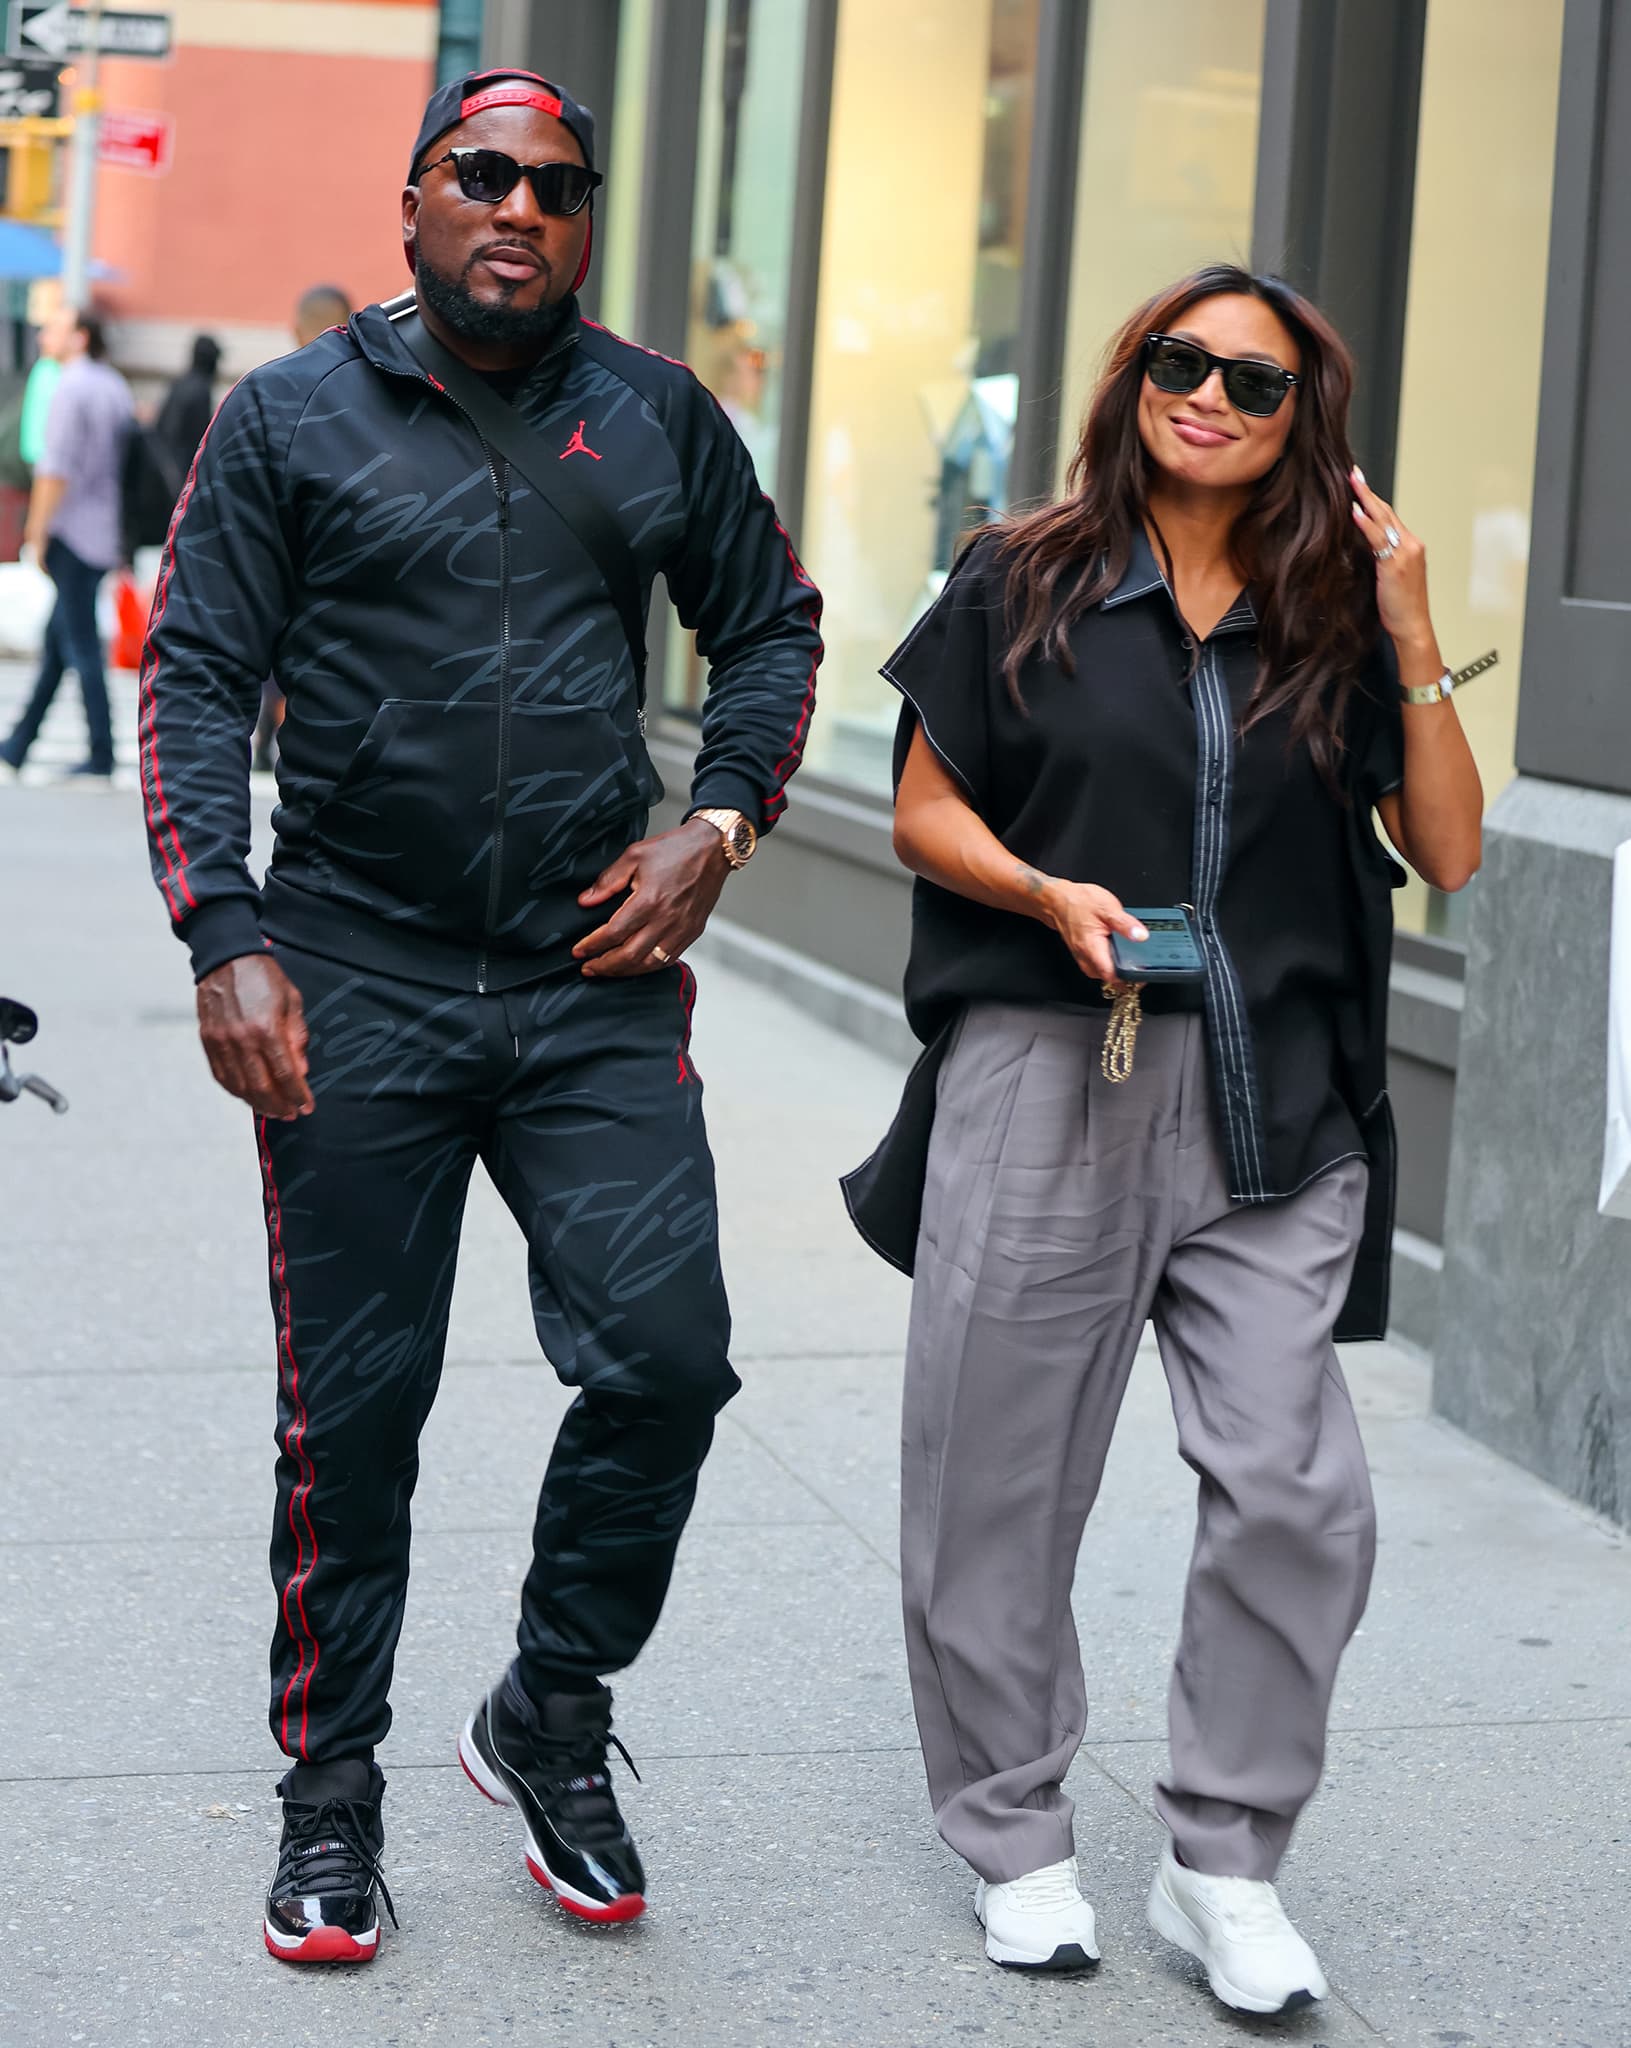 Jeezy and Jeannie Mai began dating in 2018 and got engaged in March 2020 during a quarantine date night at his Los Angeles home